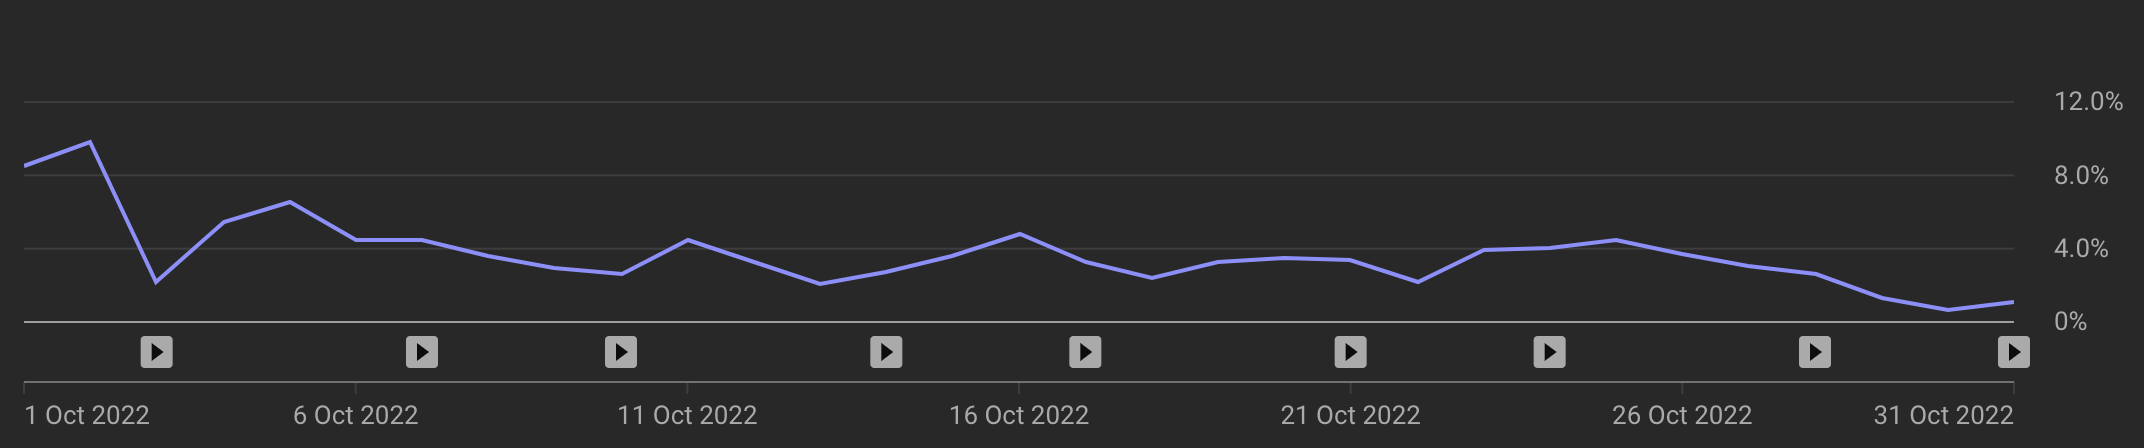 YouTube Click-Through Rate